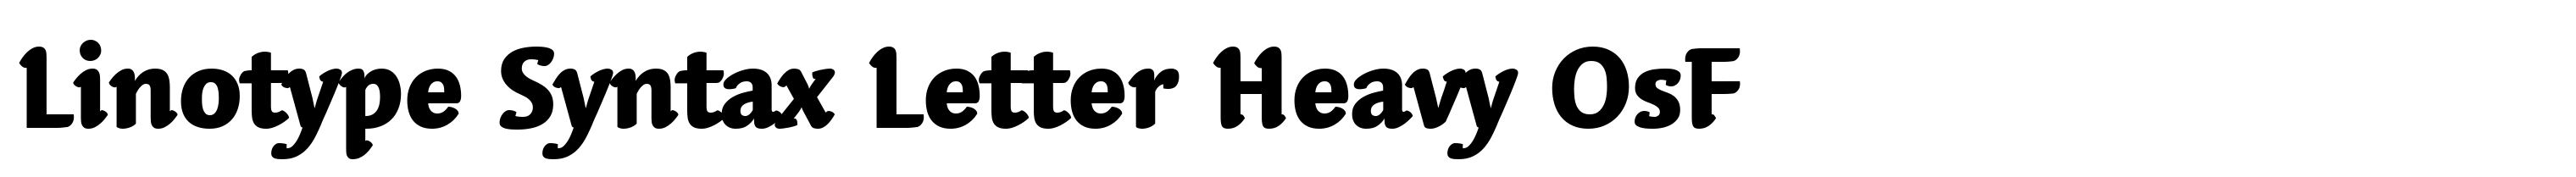 Linotype Syntax Letter Heavy OsF